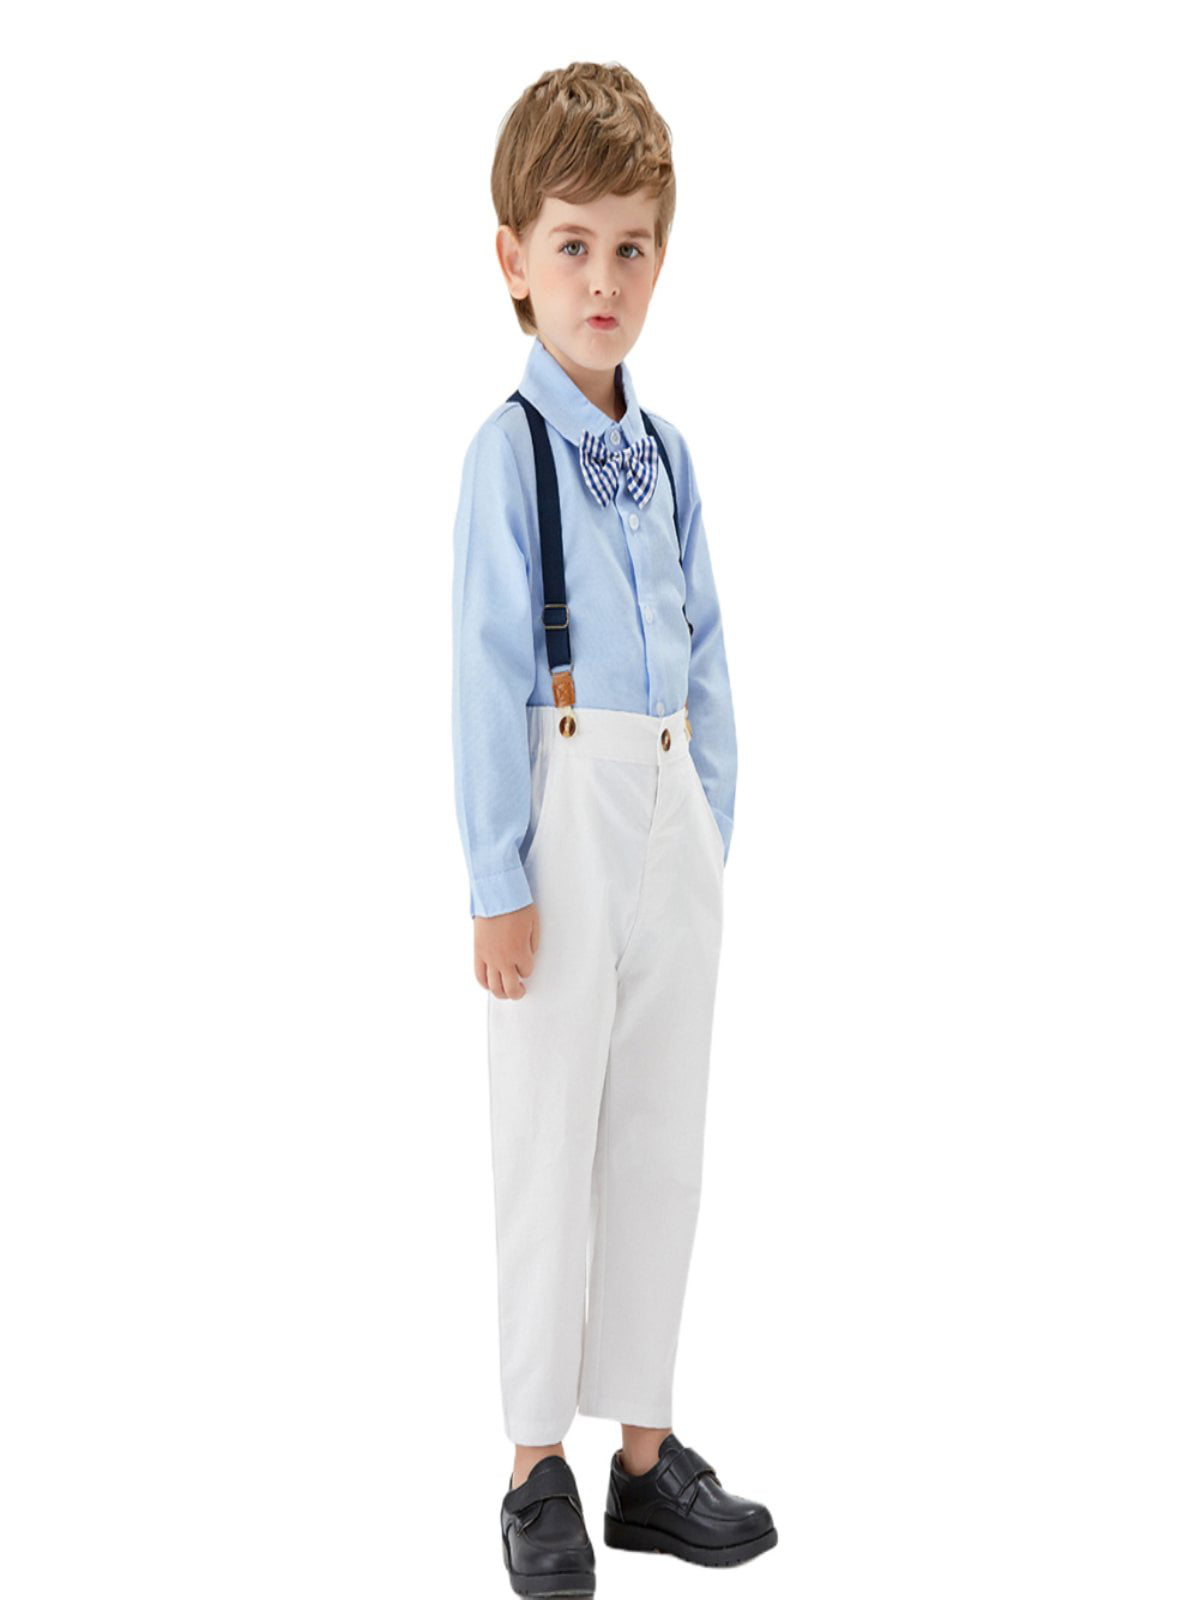 Baby Boys 2 Piece Cotton Pant Sets-Long Sleeve Tops with Bowtie+Long Pant 